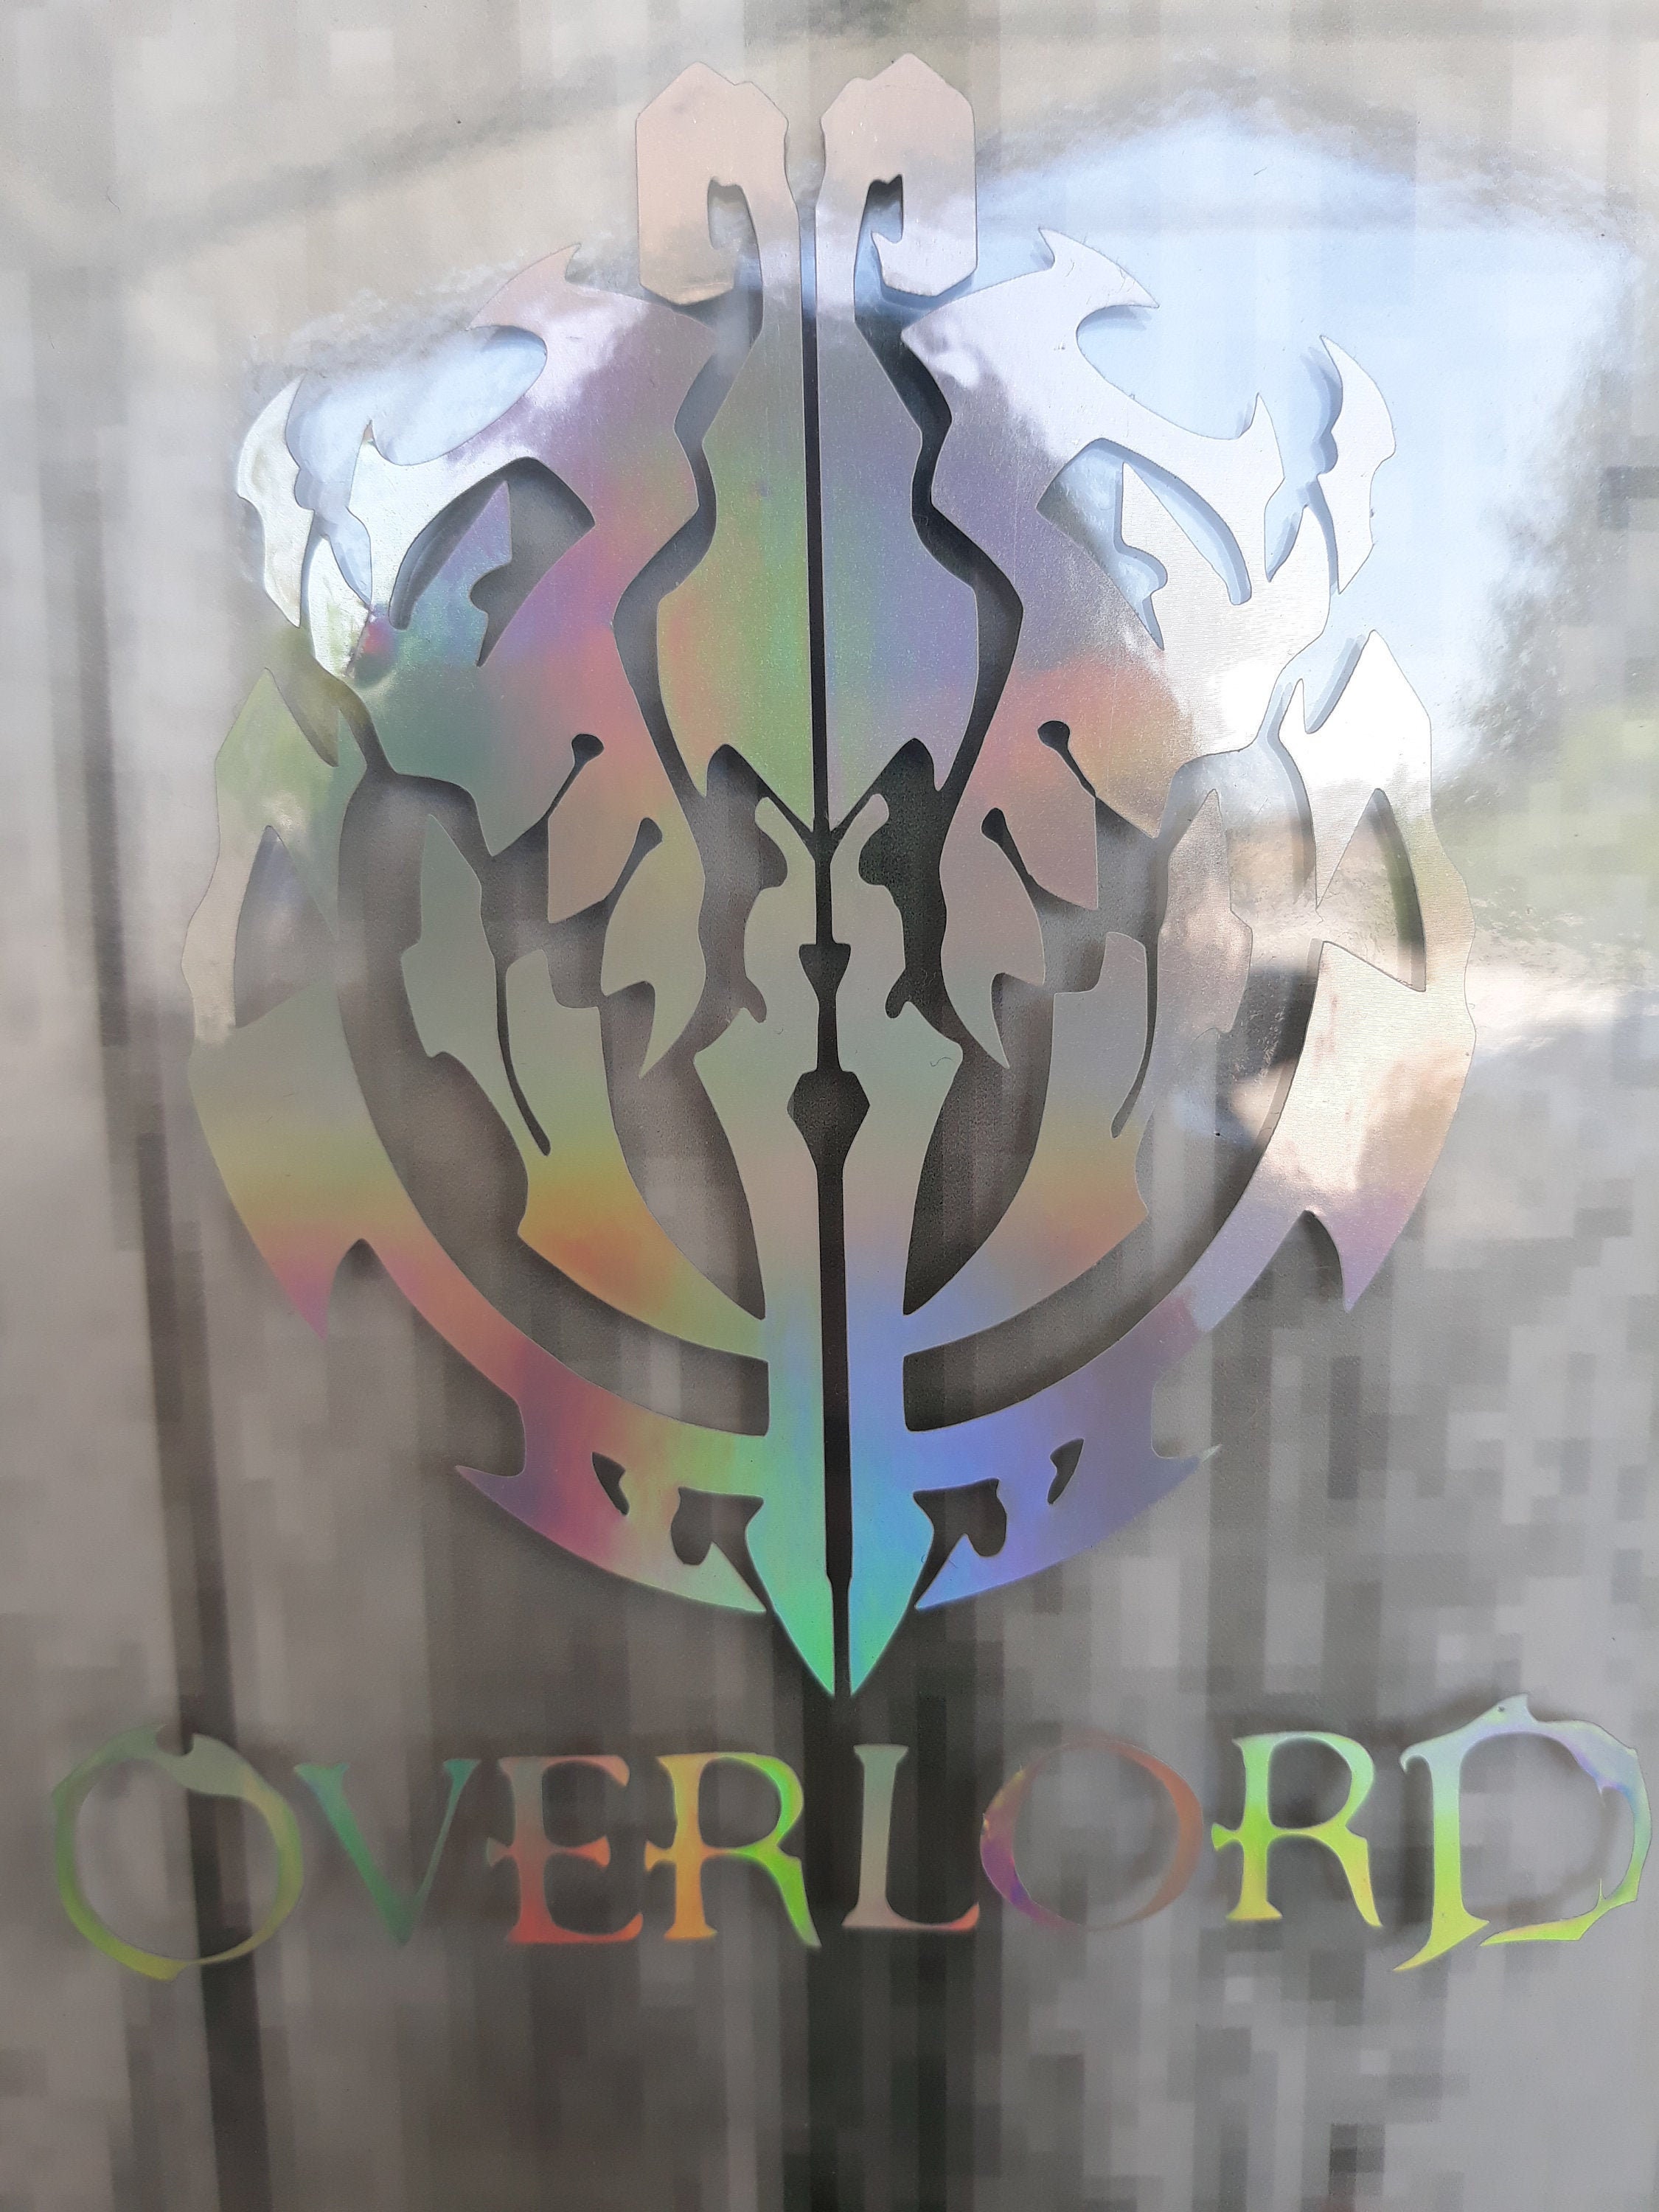 Overlord IV Sticker for Sale by leonvalley